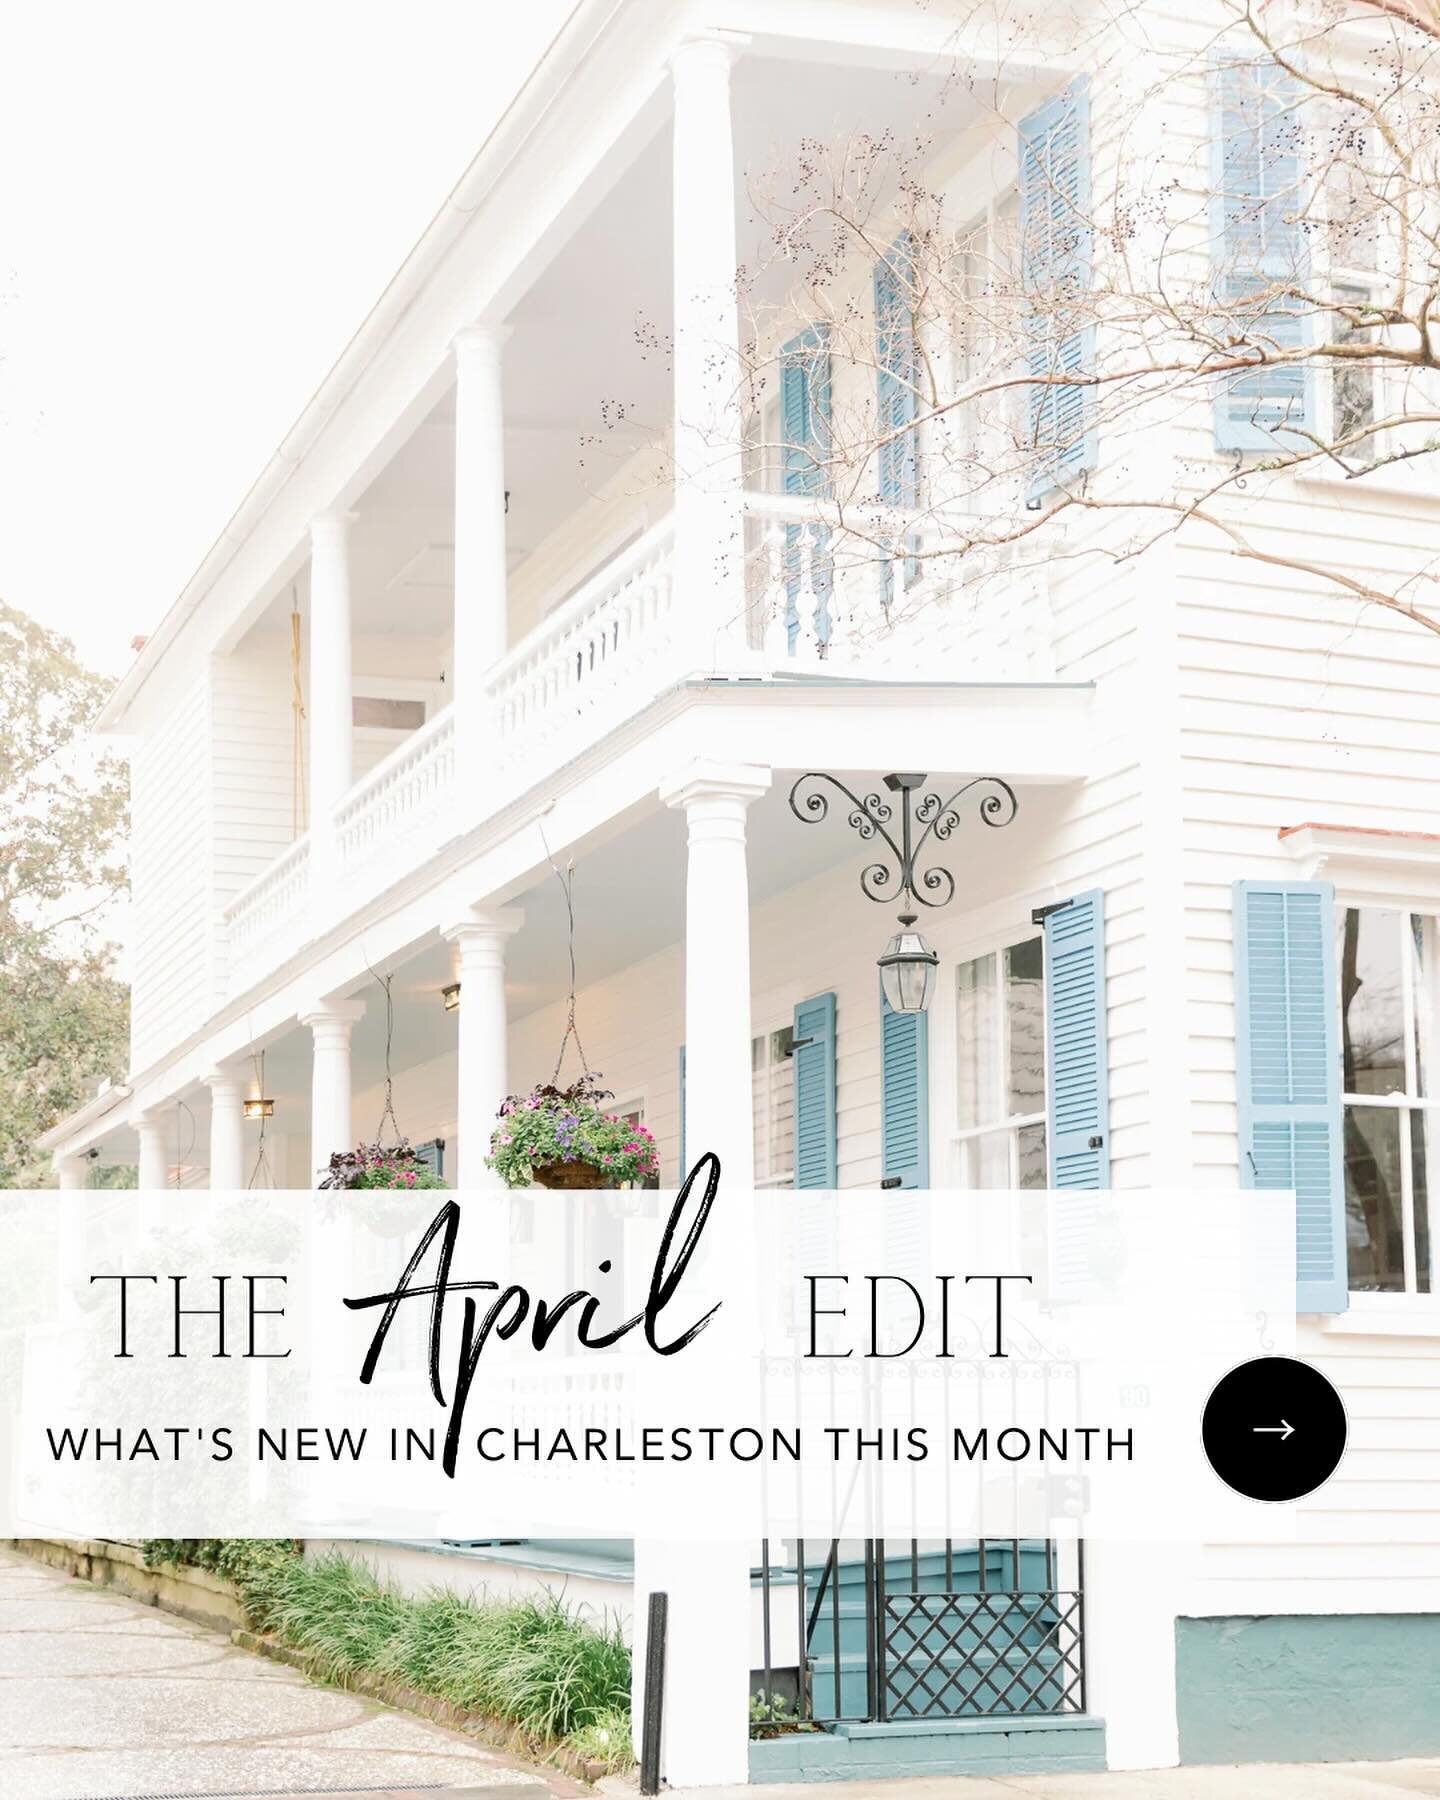 April in Charleston 🌸 &gt;&gt;&gt;

Stay up to date with everything going on in CHS through my monthly newsletter ❤️ link in bio to sign up!

#charlestonrealtor #charlestonsc #mountpleasantsc #mtp #corcorangroup